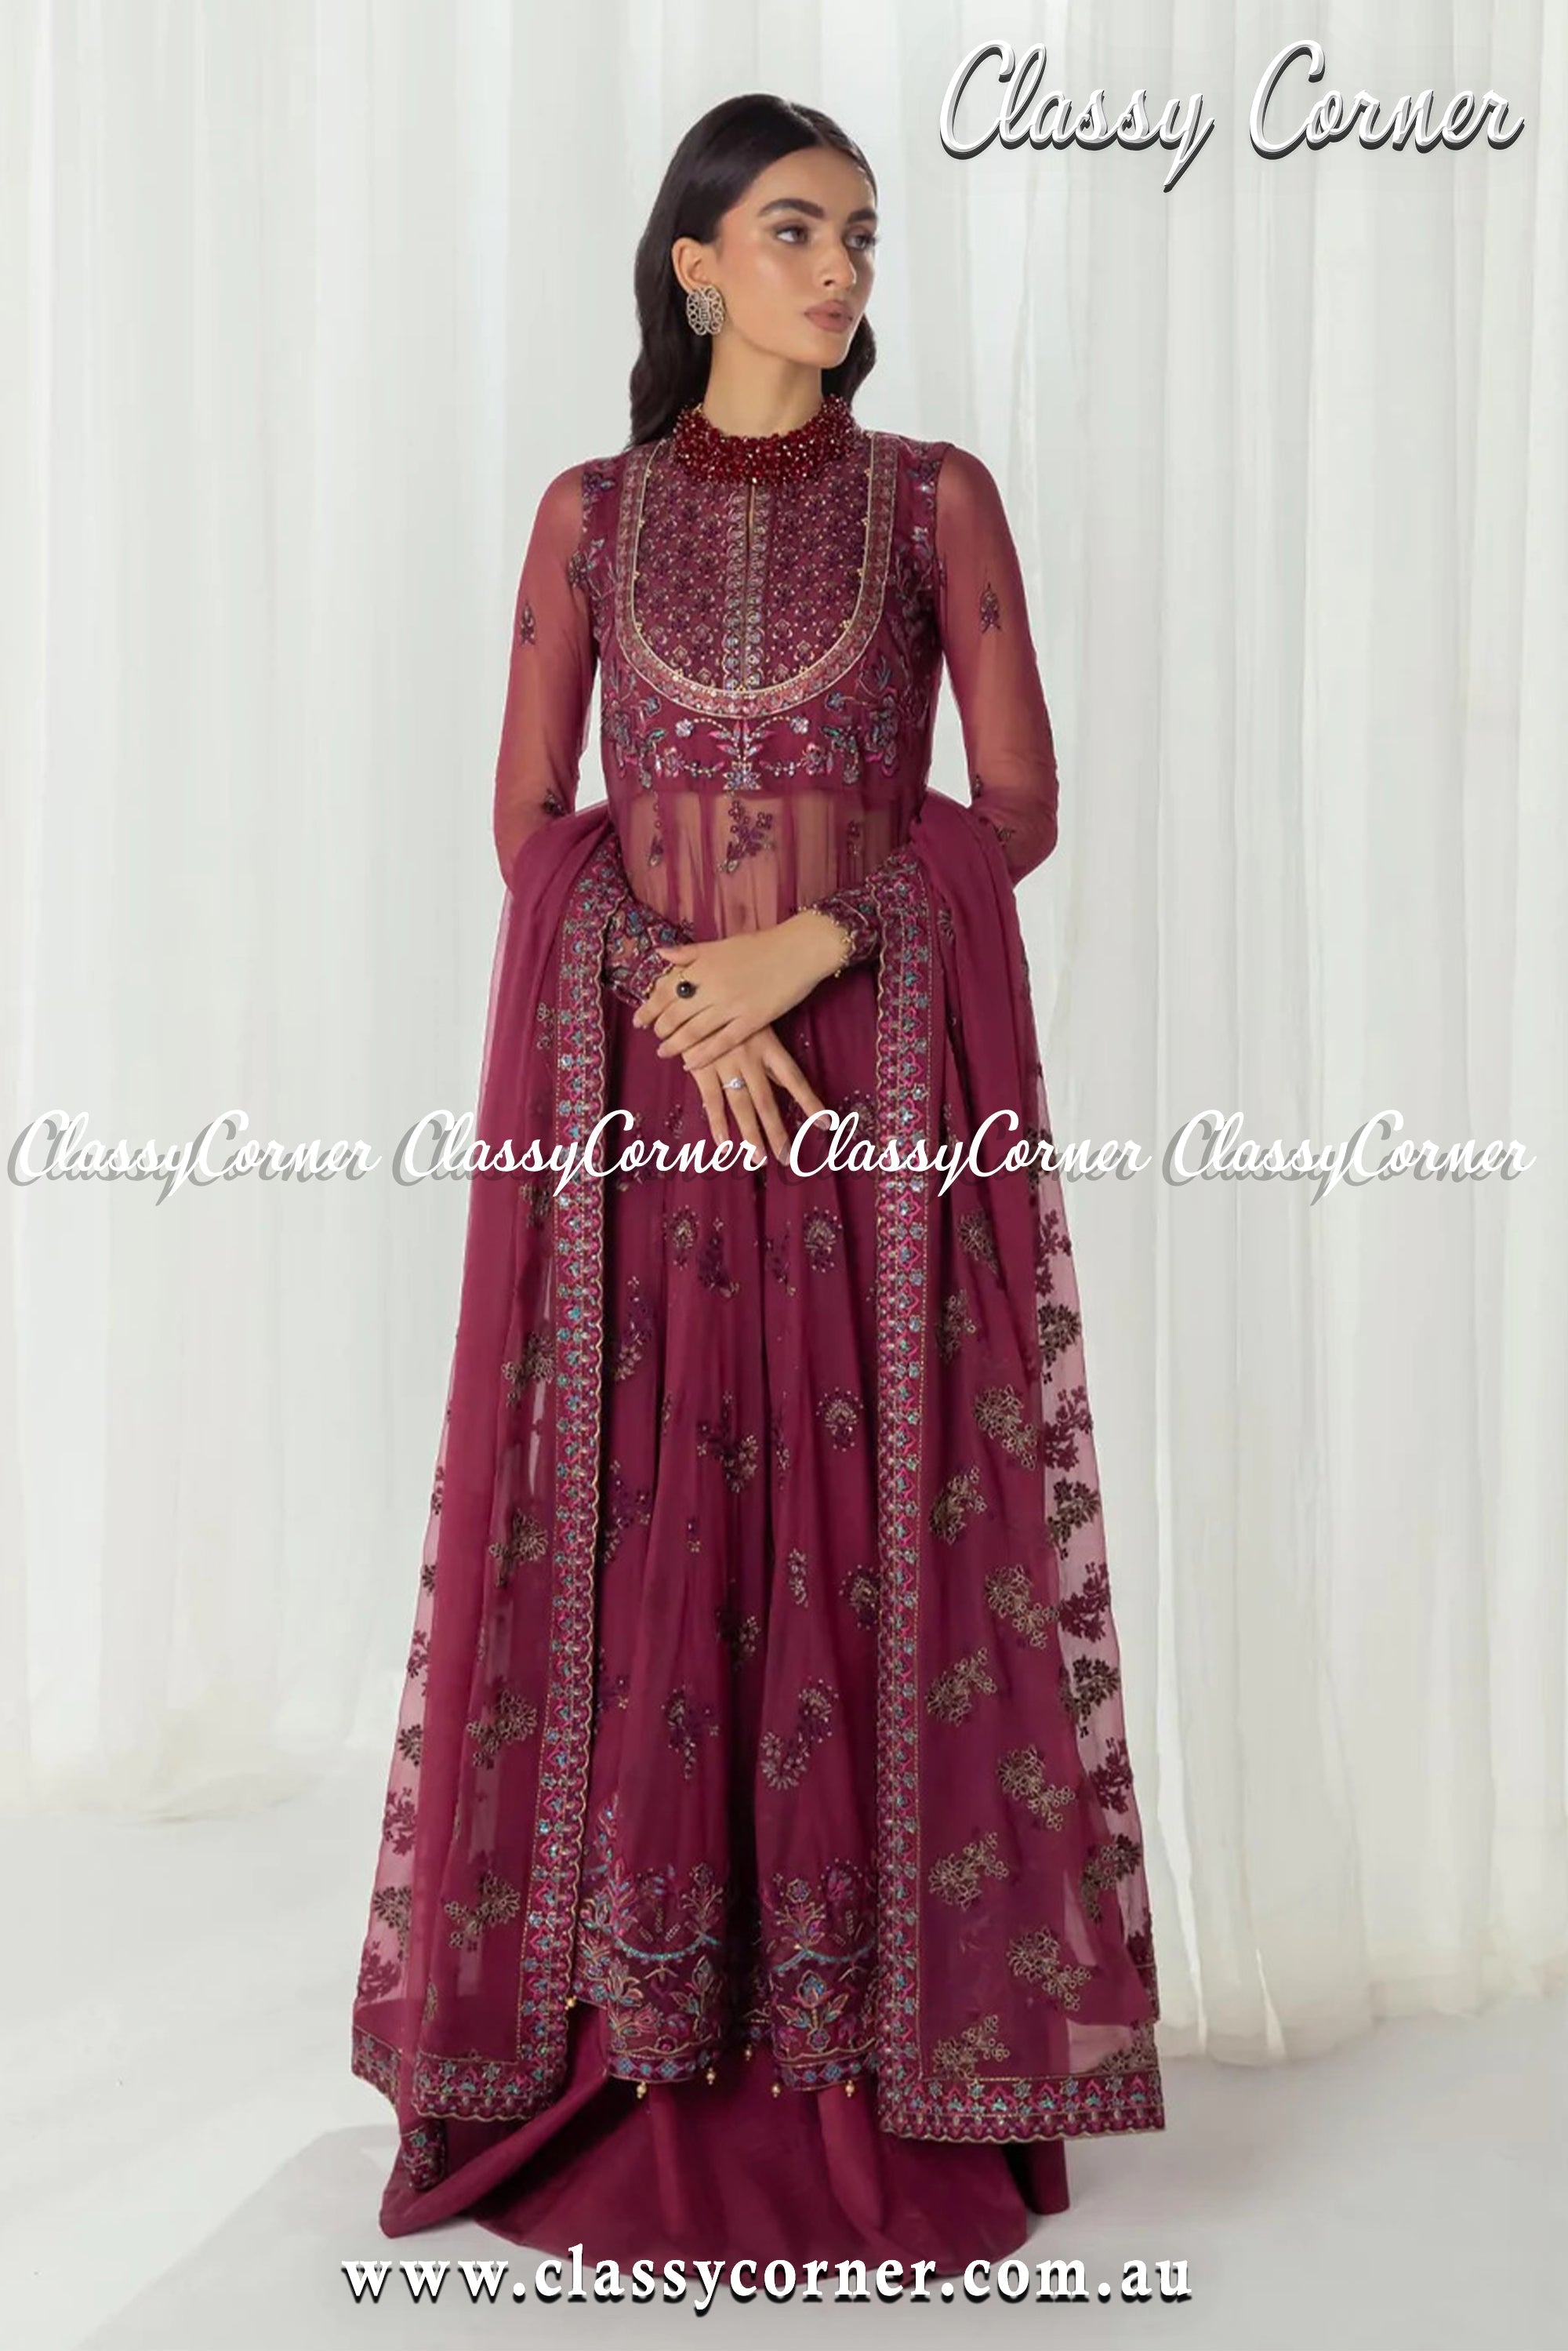 Discover exquisite Pakistani gowns and lehengas customized to your taste at Classy Corner's online shop. Enjoy the very best prices and indulge in rich Pakistani fashion. Shop now